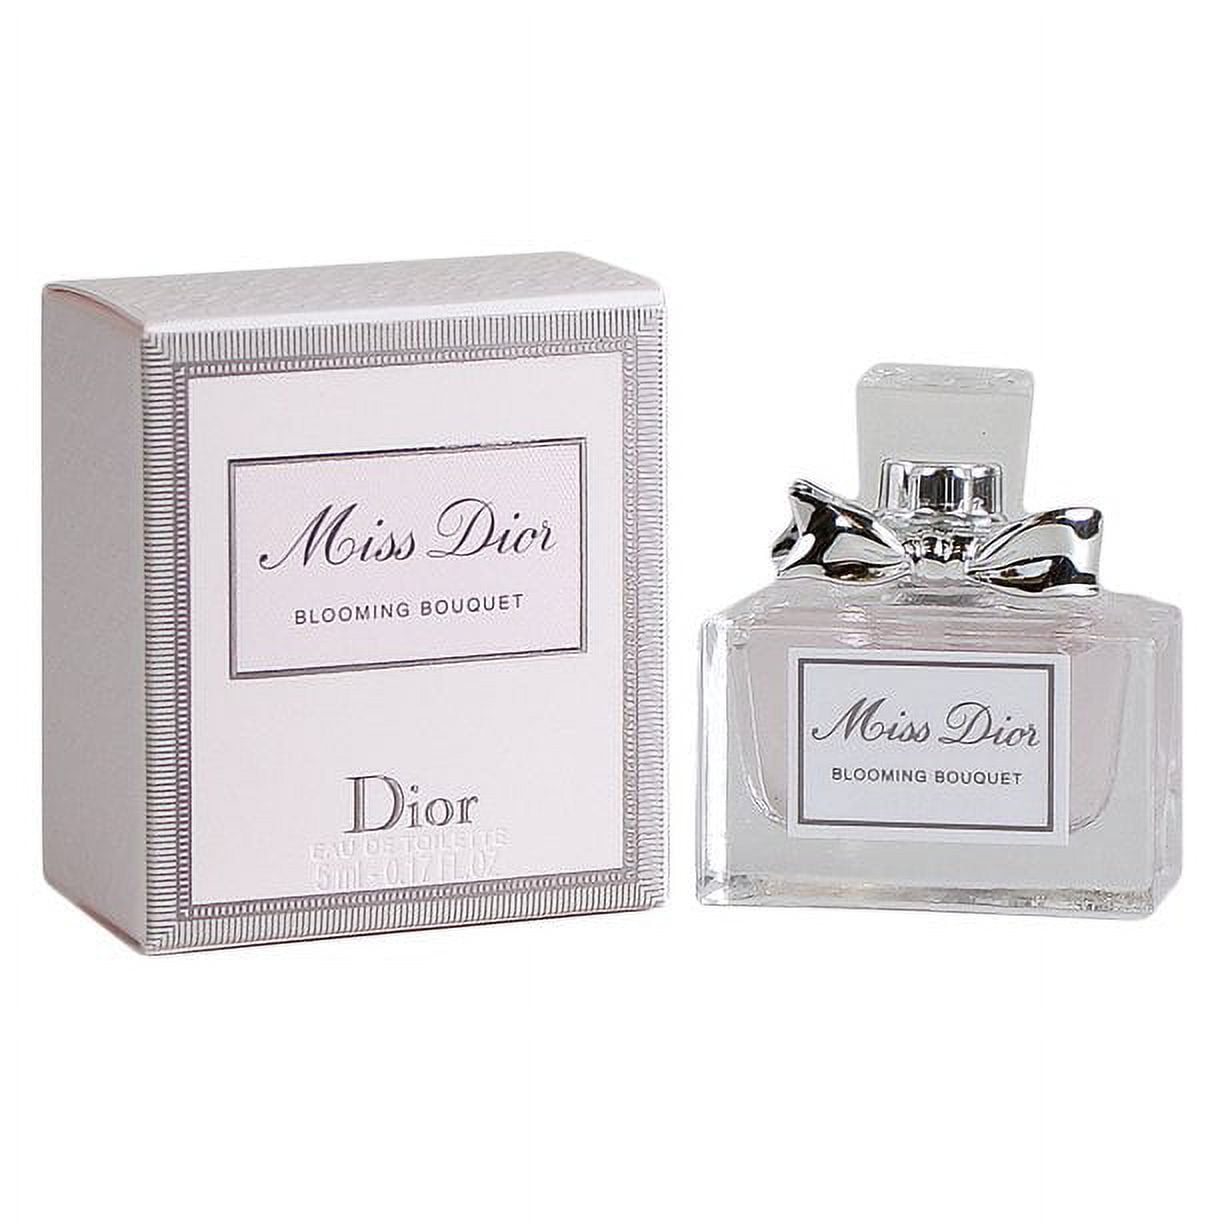 Dior Miss Dior Blooming Bouquet / Christian Dior EDT Spray 1.7 oz (50 ml)  (w) 3348900871984 - Fragrances & Beauty, Miss Dior Blooming Bouquet -  Jomashop